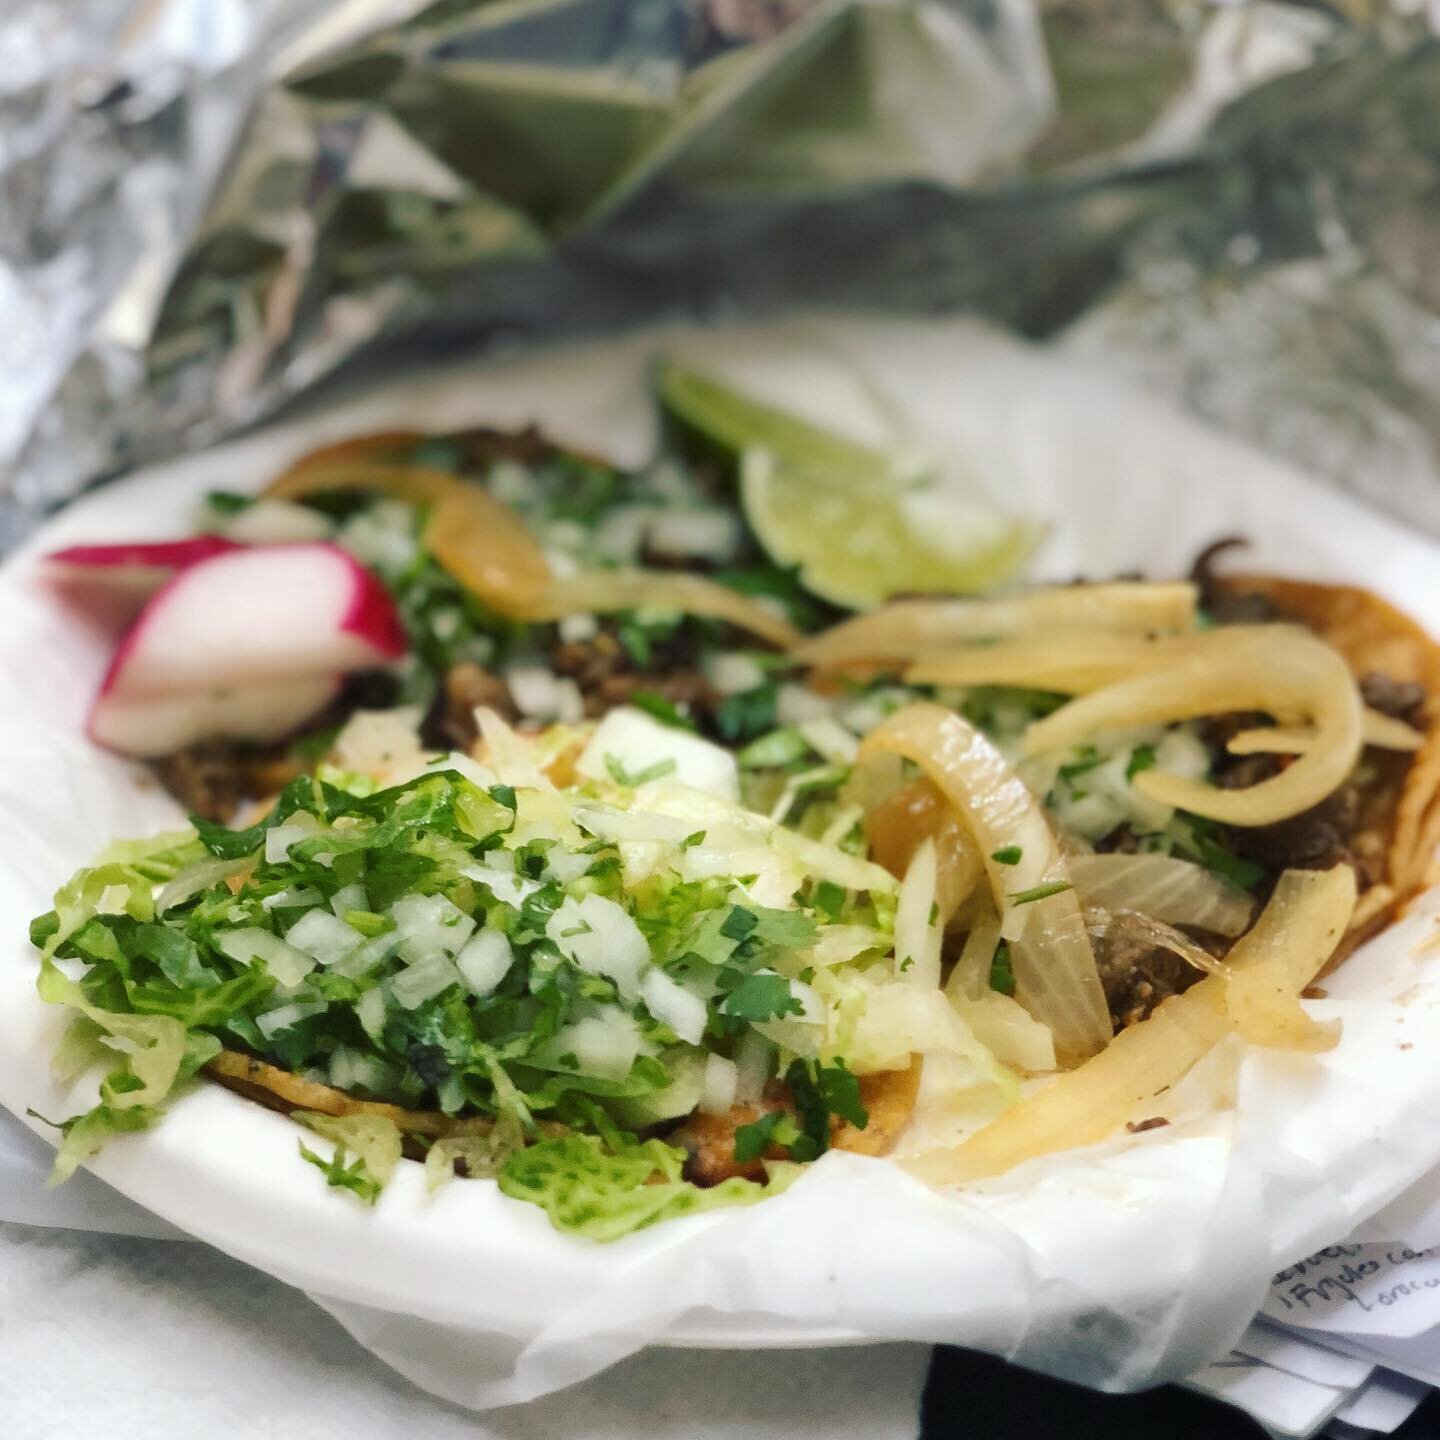 We really recommend @tacoselchino510 their Shrimp tacos are simply delicious!  Don&rsquo;t just take our word for it, come out and try them out!  #delicioustacos #mexicantacos